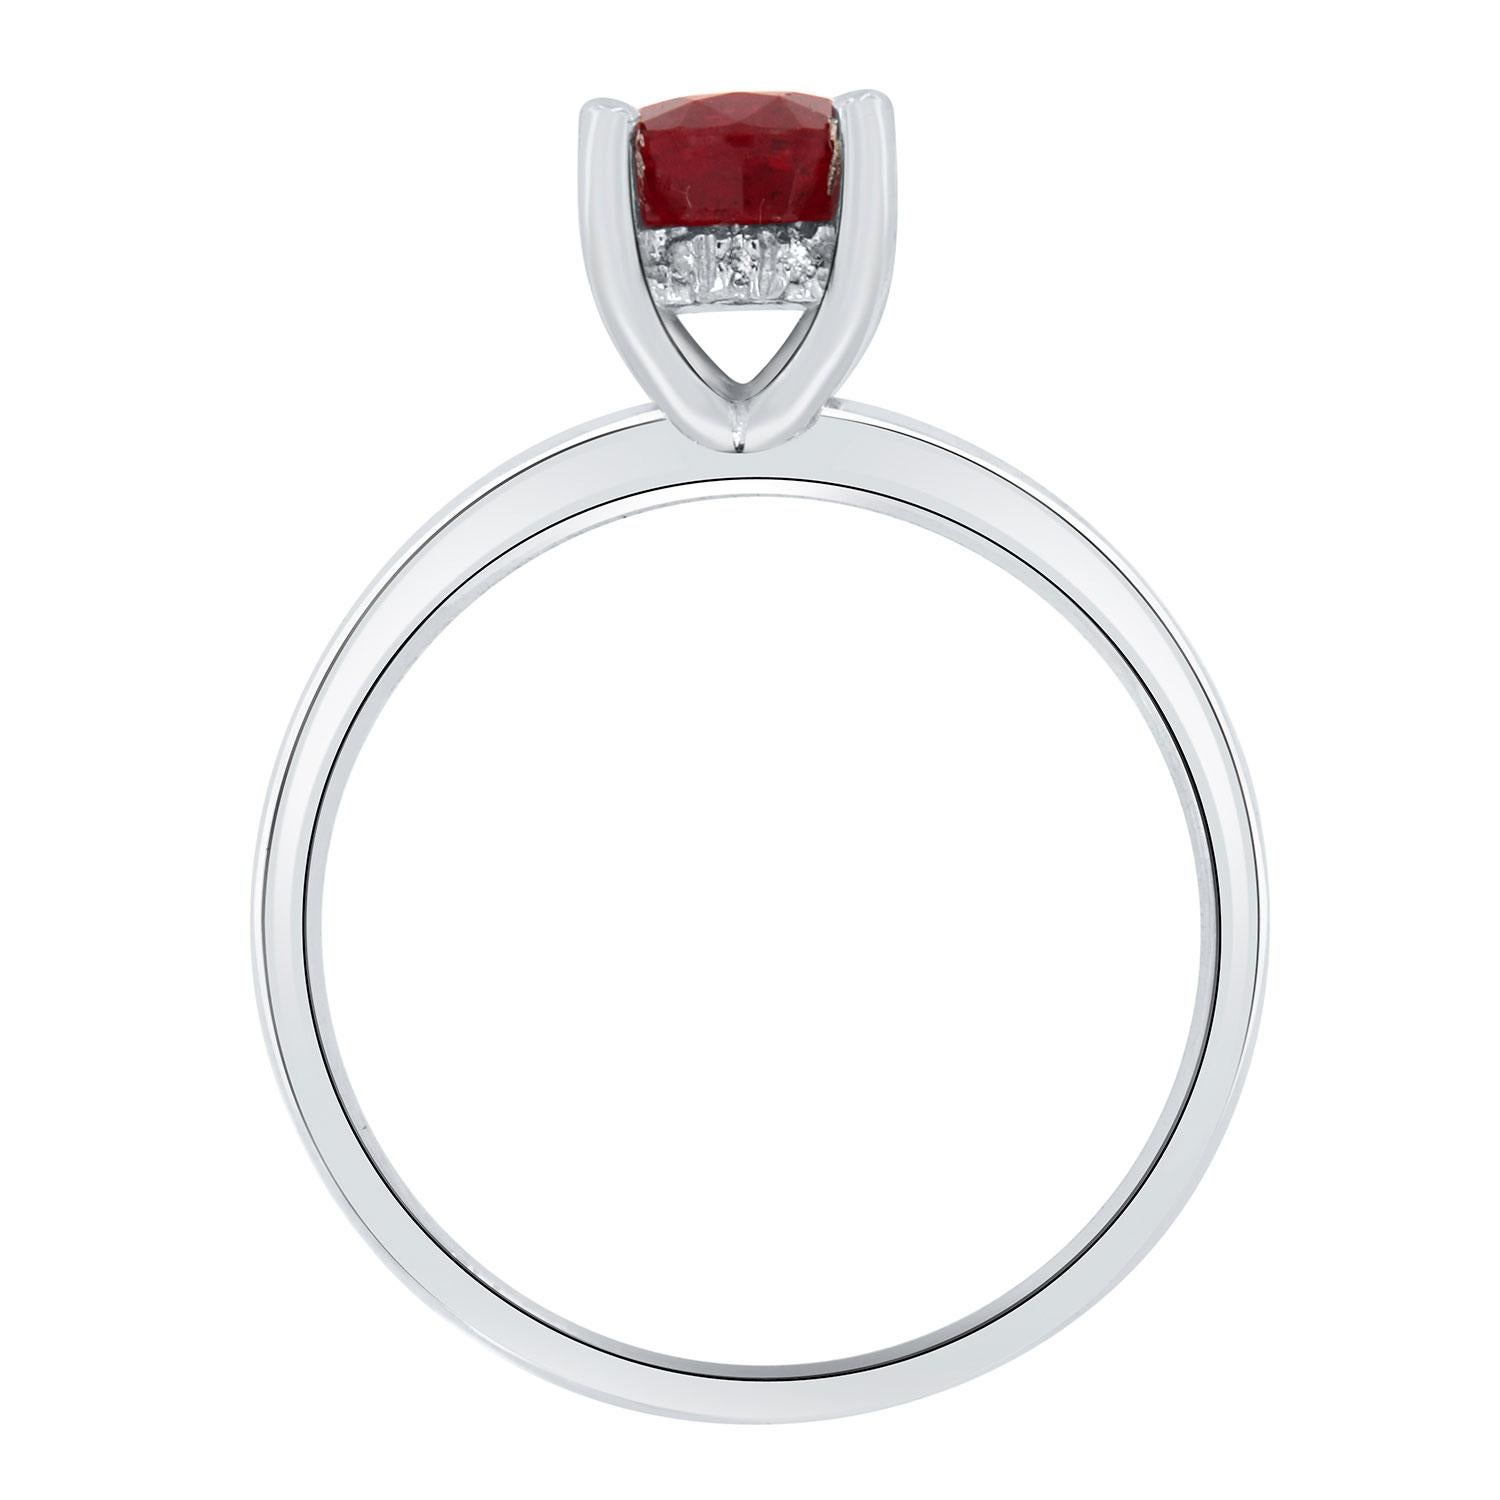 Oval Cut GIA Certified 1.47 Carat Oval Red Ruby Hidden Halo Diamond Ring For Sale